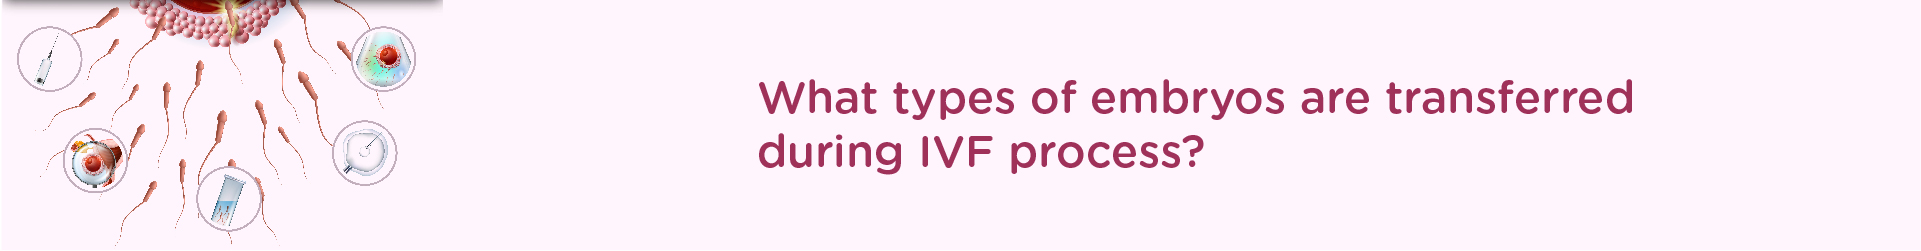 What Types of Embryos are Transferred During IVF Process?